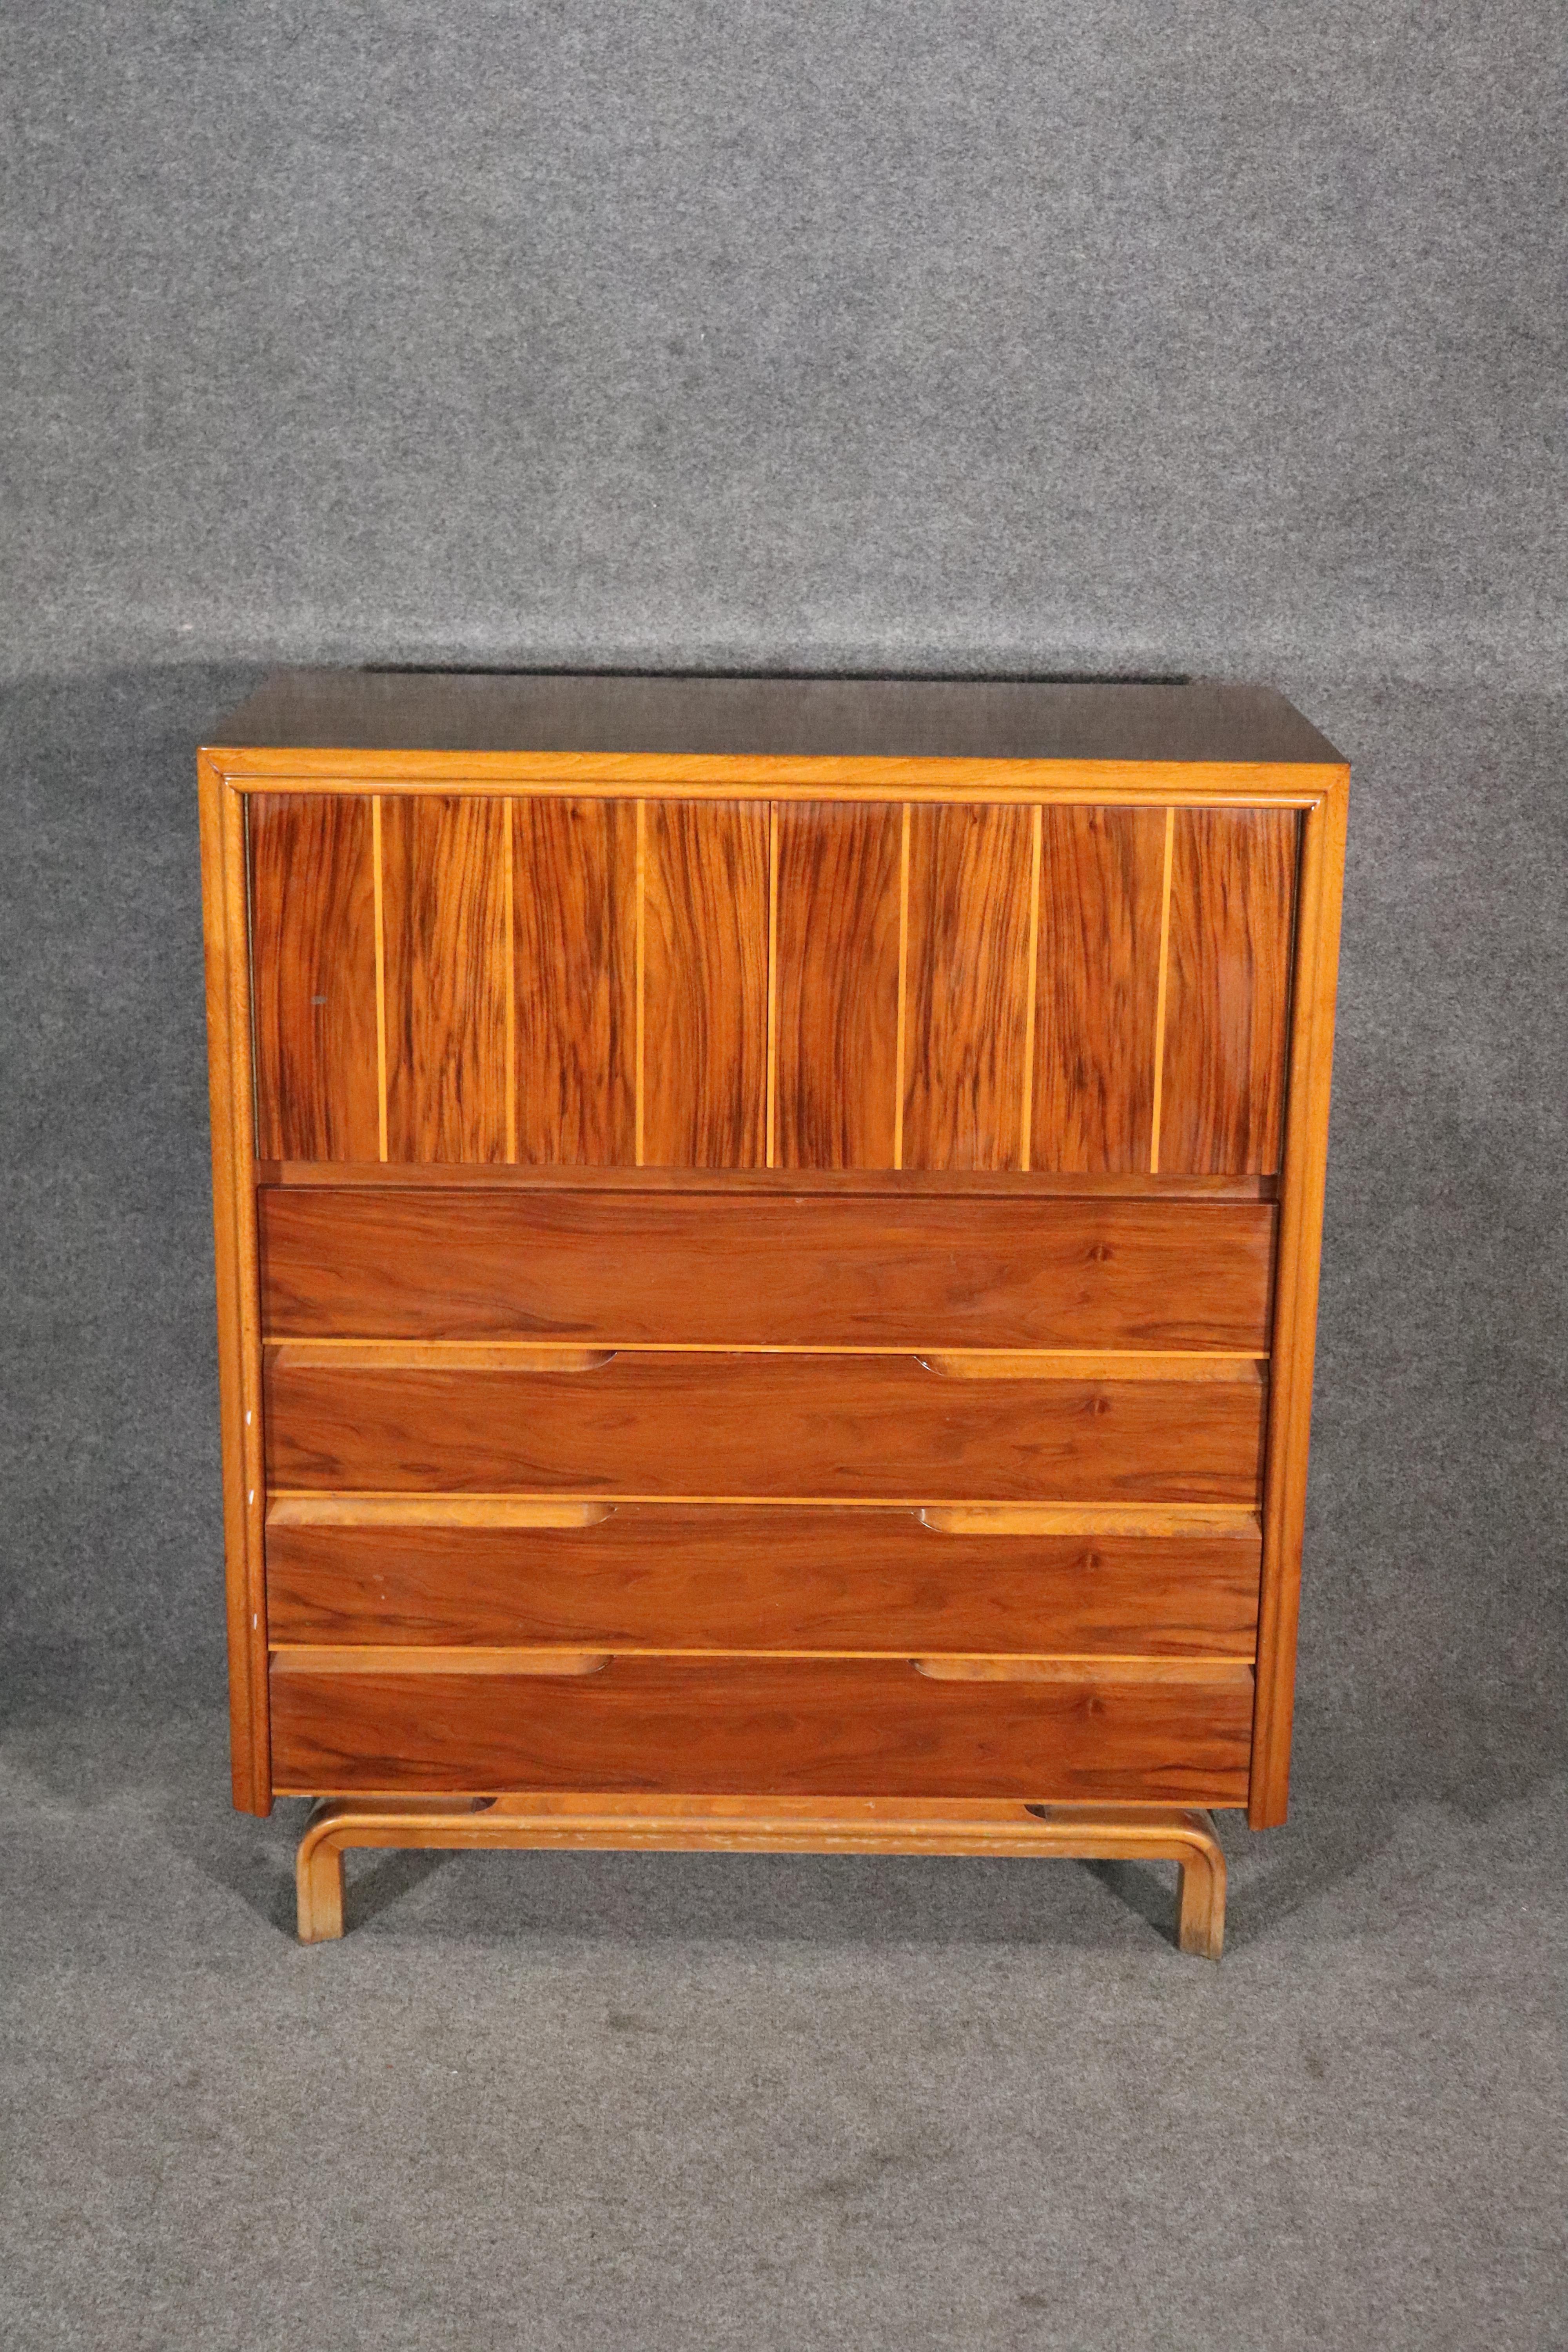 Edmond Spence designed bedroom set, including full size headboard, long dresser, gentleman's chest, and two bedside tables. Superb mid-century design with rich rosewood grain throughout.
tall chest: 46h, 40w, 20d
headboard: 35h, 60.25w
long dresser: